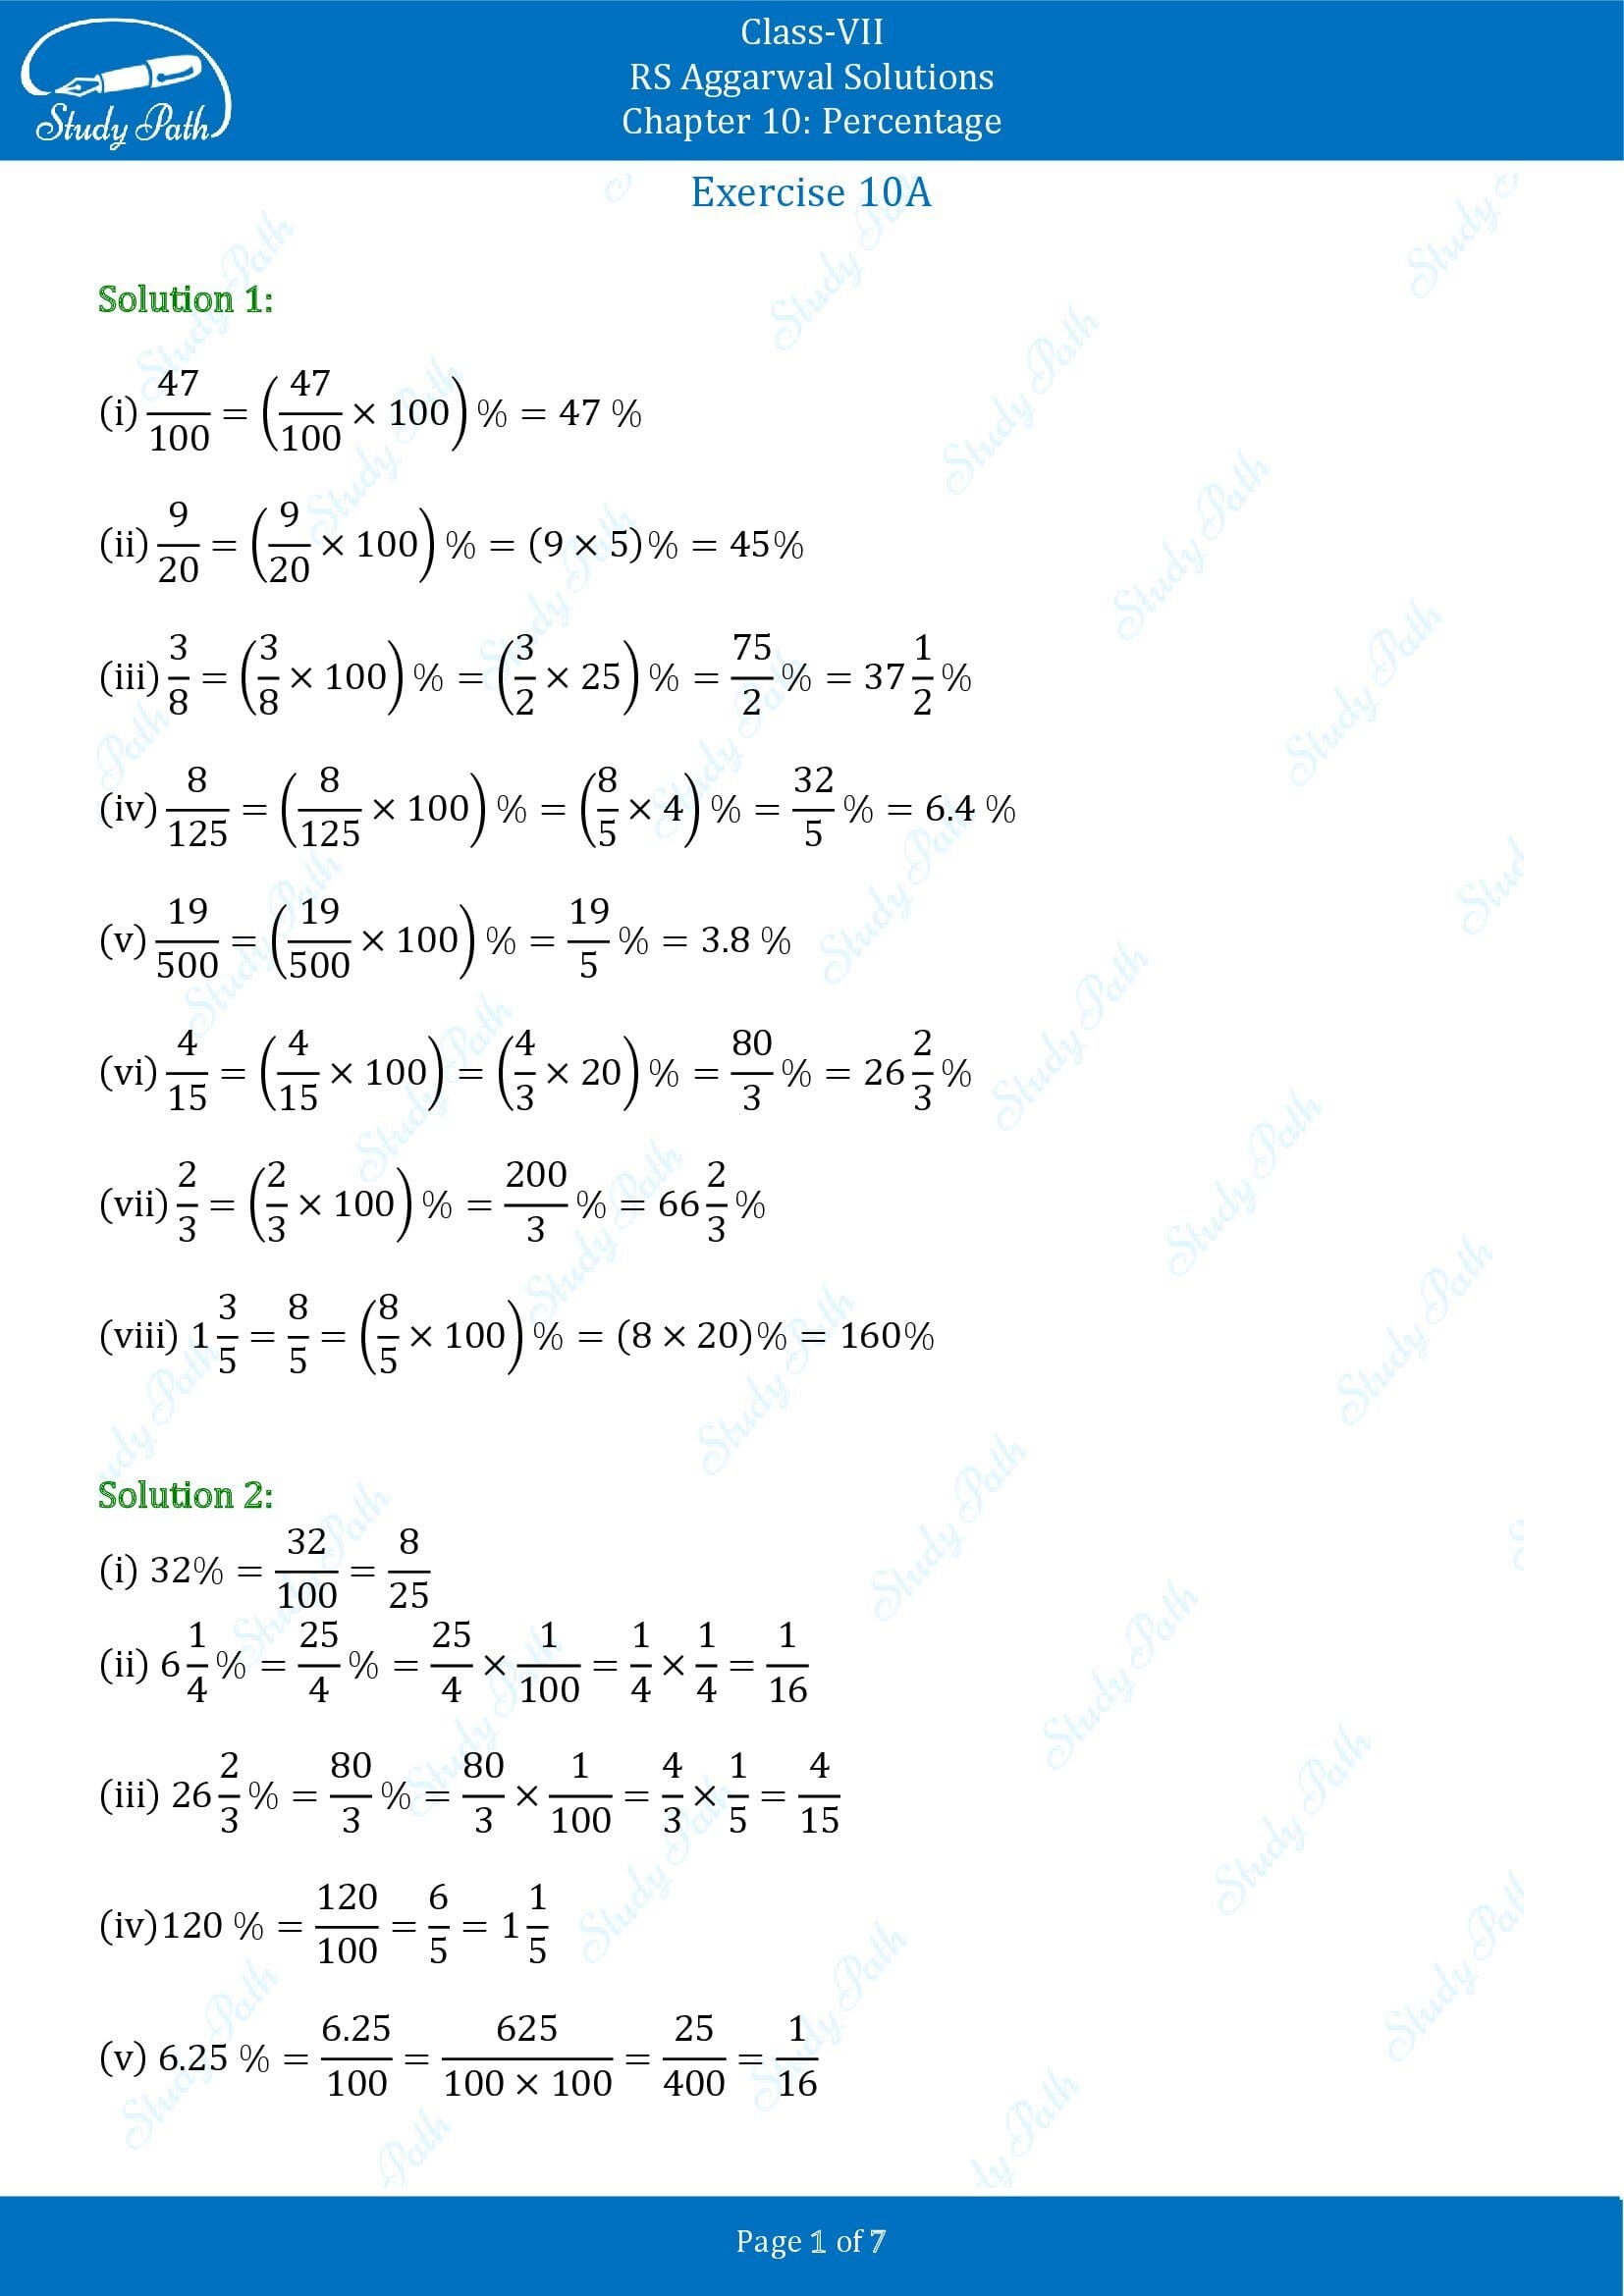 RS Aggarwal Solutions Class 7 Chapter 10 Percentage Exercise 10A 00001